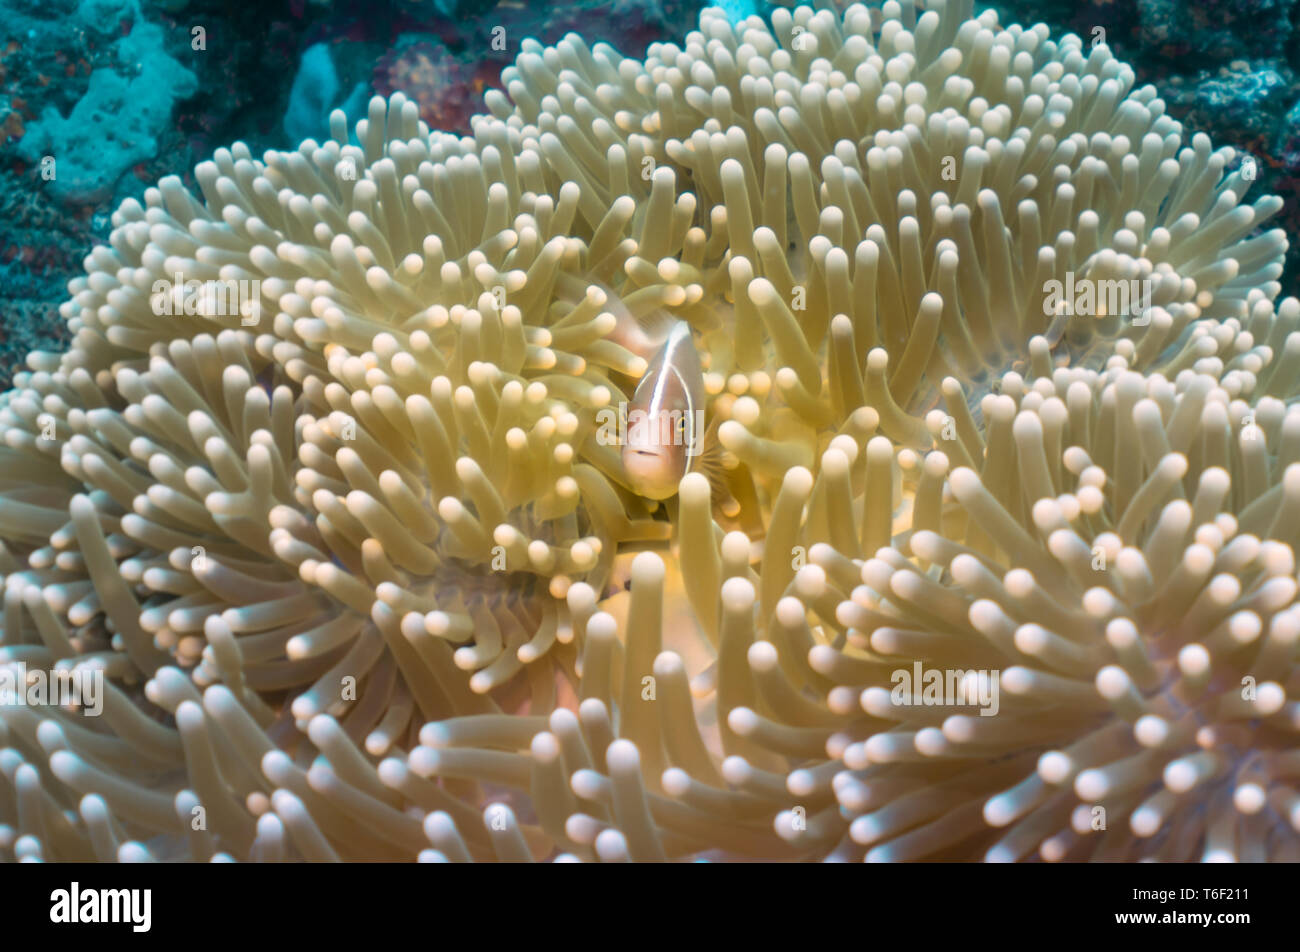 Orange Anemone Fish in the middle of a yellow anemone, looking to the camera. Underwater shot in Tulamben, Bali, Indonesia. Stock Photo